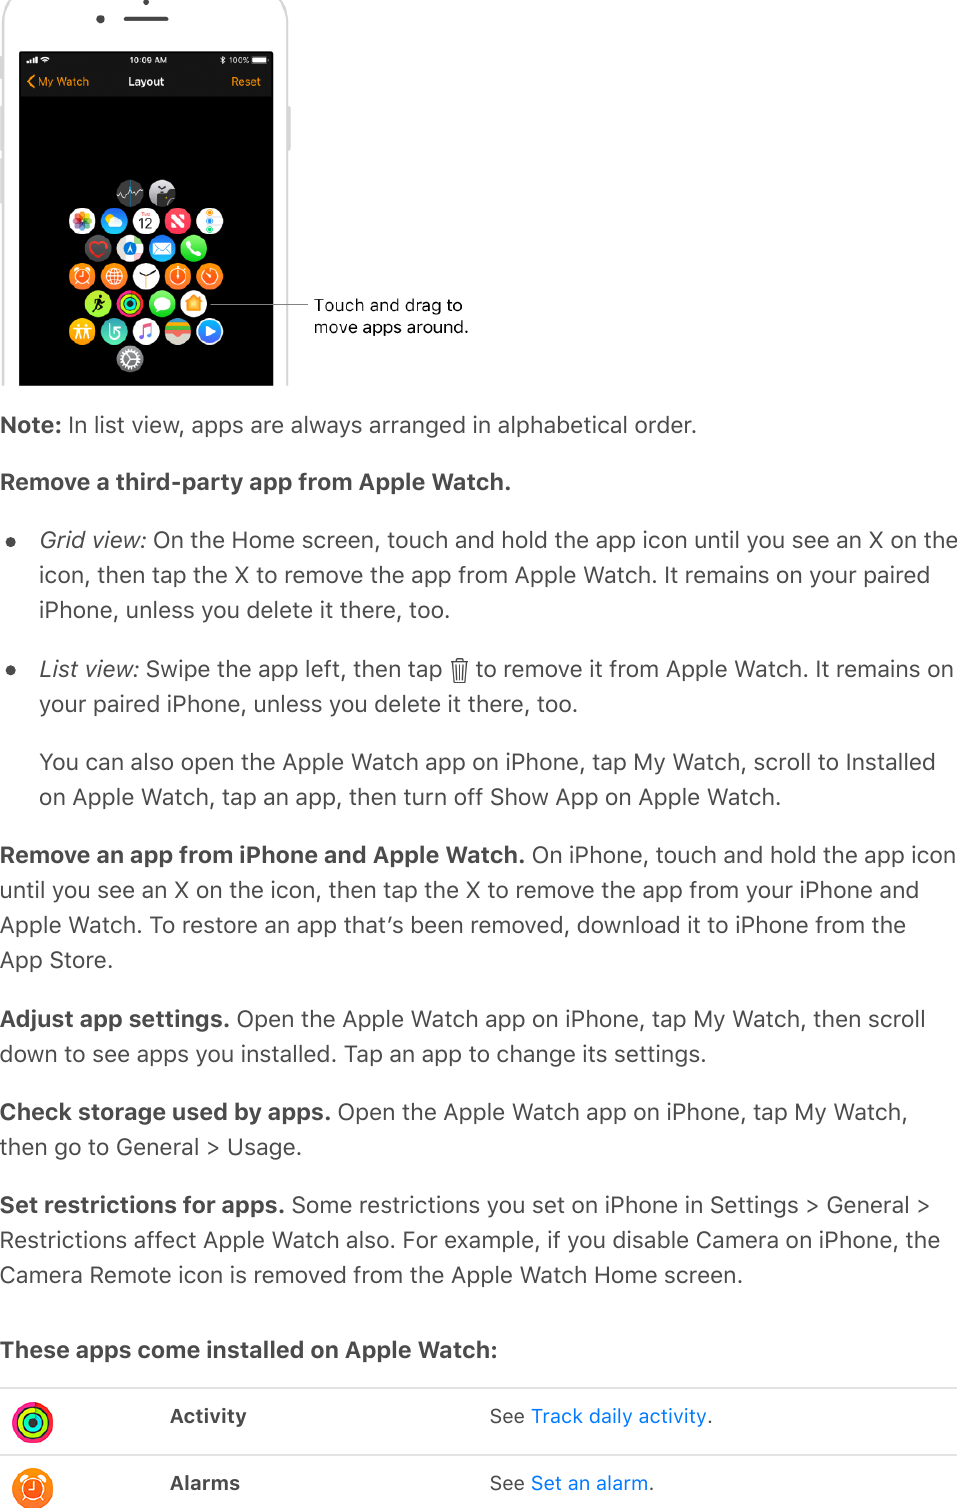 Note: In list view, apps are always arranged in alphabetical order.Remove a third-party app from Apple Watch.Grid view: On the Home screen, touch and hold the app icon until you see an X on theicon, then tap the X to remove the app from Apple Watch. It remains on your pairediPhone, unless you delete it there, too.List view: Swipe the app left, then tap   to remove it from Apple Watch. It remains onyour paired iPhone, unless you delete it there, too.You can also open the Apple Watch app on iPhone, tap My Watch, scroll to Installedon Apple Watch, tap an app, then turn off Show App on Apple Watch.Remove an app from iPhone and Apple Watch. On iPhone, touch and hold the app iconuntil you see an X on the icon, then tap the X to remove the app from your iPhone andApple Watch. To restore an app thatʼs been removed, download it to iPhone from theApp Store.Adjust app settings. Open the Apple Watch app on iPhone, tap My Watch, then scrolldown to see apps you installed. Tap an app to change its settings.Check storage used by apps. Open the Apple Watch app on iPhone, tap My Watch,then go to General &gt; Usage.Set restrictions for apps. Some restrictions you set on iPhone in Settings &gt; General &gt;Restrictions affect Apple Watch also. For example, if you disable Camera on iPhone, theCamera Remote icon is removed from the Apple Watch Home screen.These apps come installed on Apple Watch:Activity See  .Alarms See  .Track daily activitySet an alarm